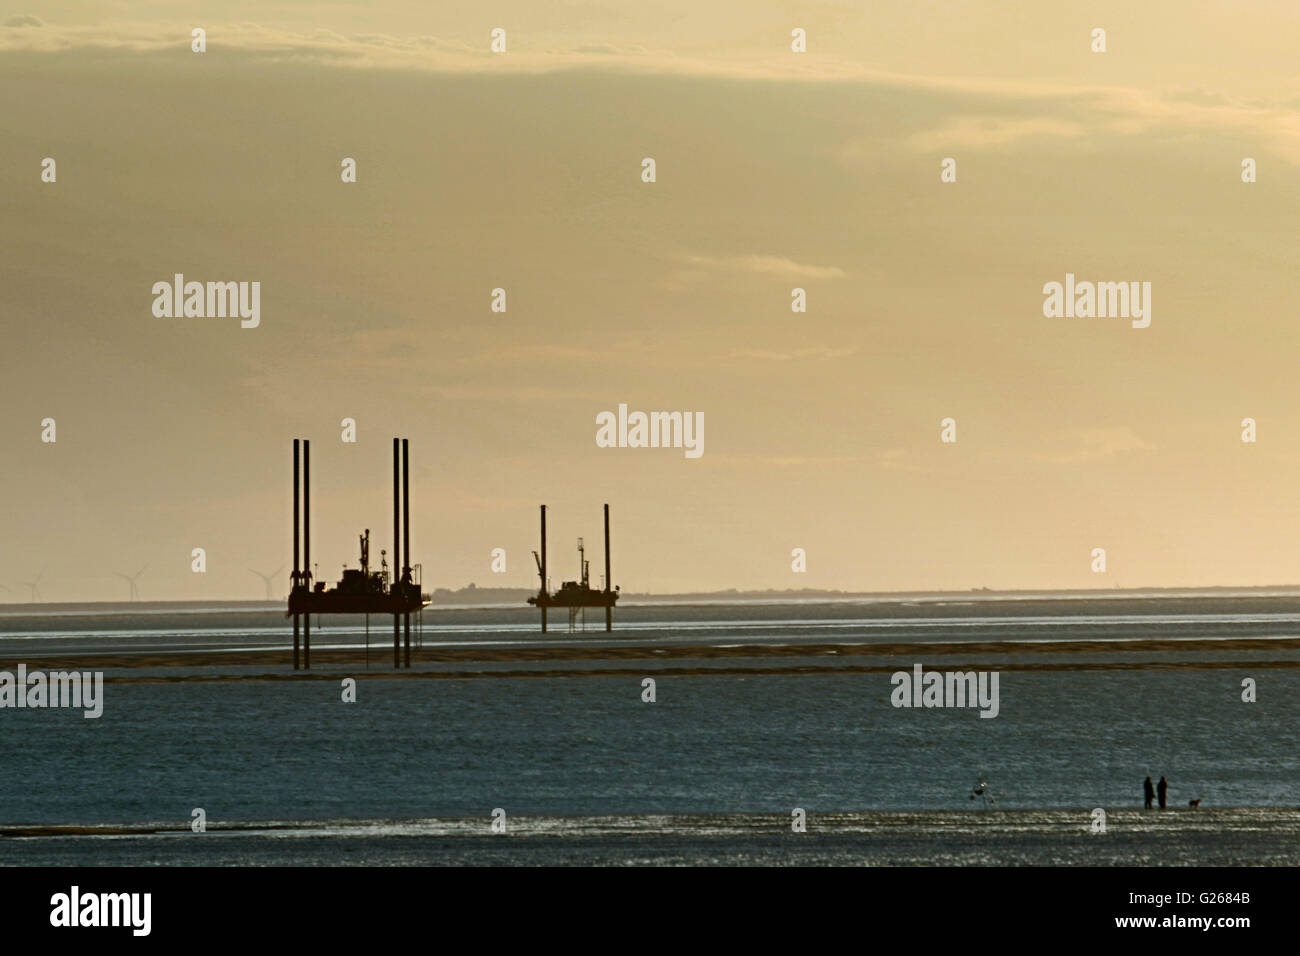 Morecambe Bay, UK. 24th May, 2016. National Grid jack leg drilling Barges are currently undertaking survey work in Morecambe Bay as proposals are developed ahead of this year’s public consultation on the North West Coast Connections project. The work could influence the proposed routing of tunnel that will carry the high voltage DC cable across the Bay which will connect the proposed Nuclear Power Station at Moorside in Cumbria to the National Grid at Middleton Sands Substation at Heysham. Credit:  David Billinge/Alamy Live News Stock Photo